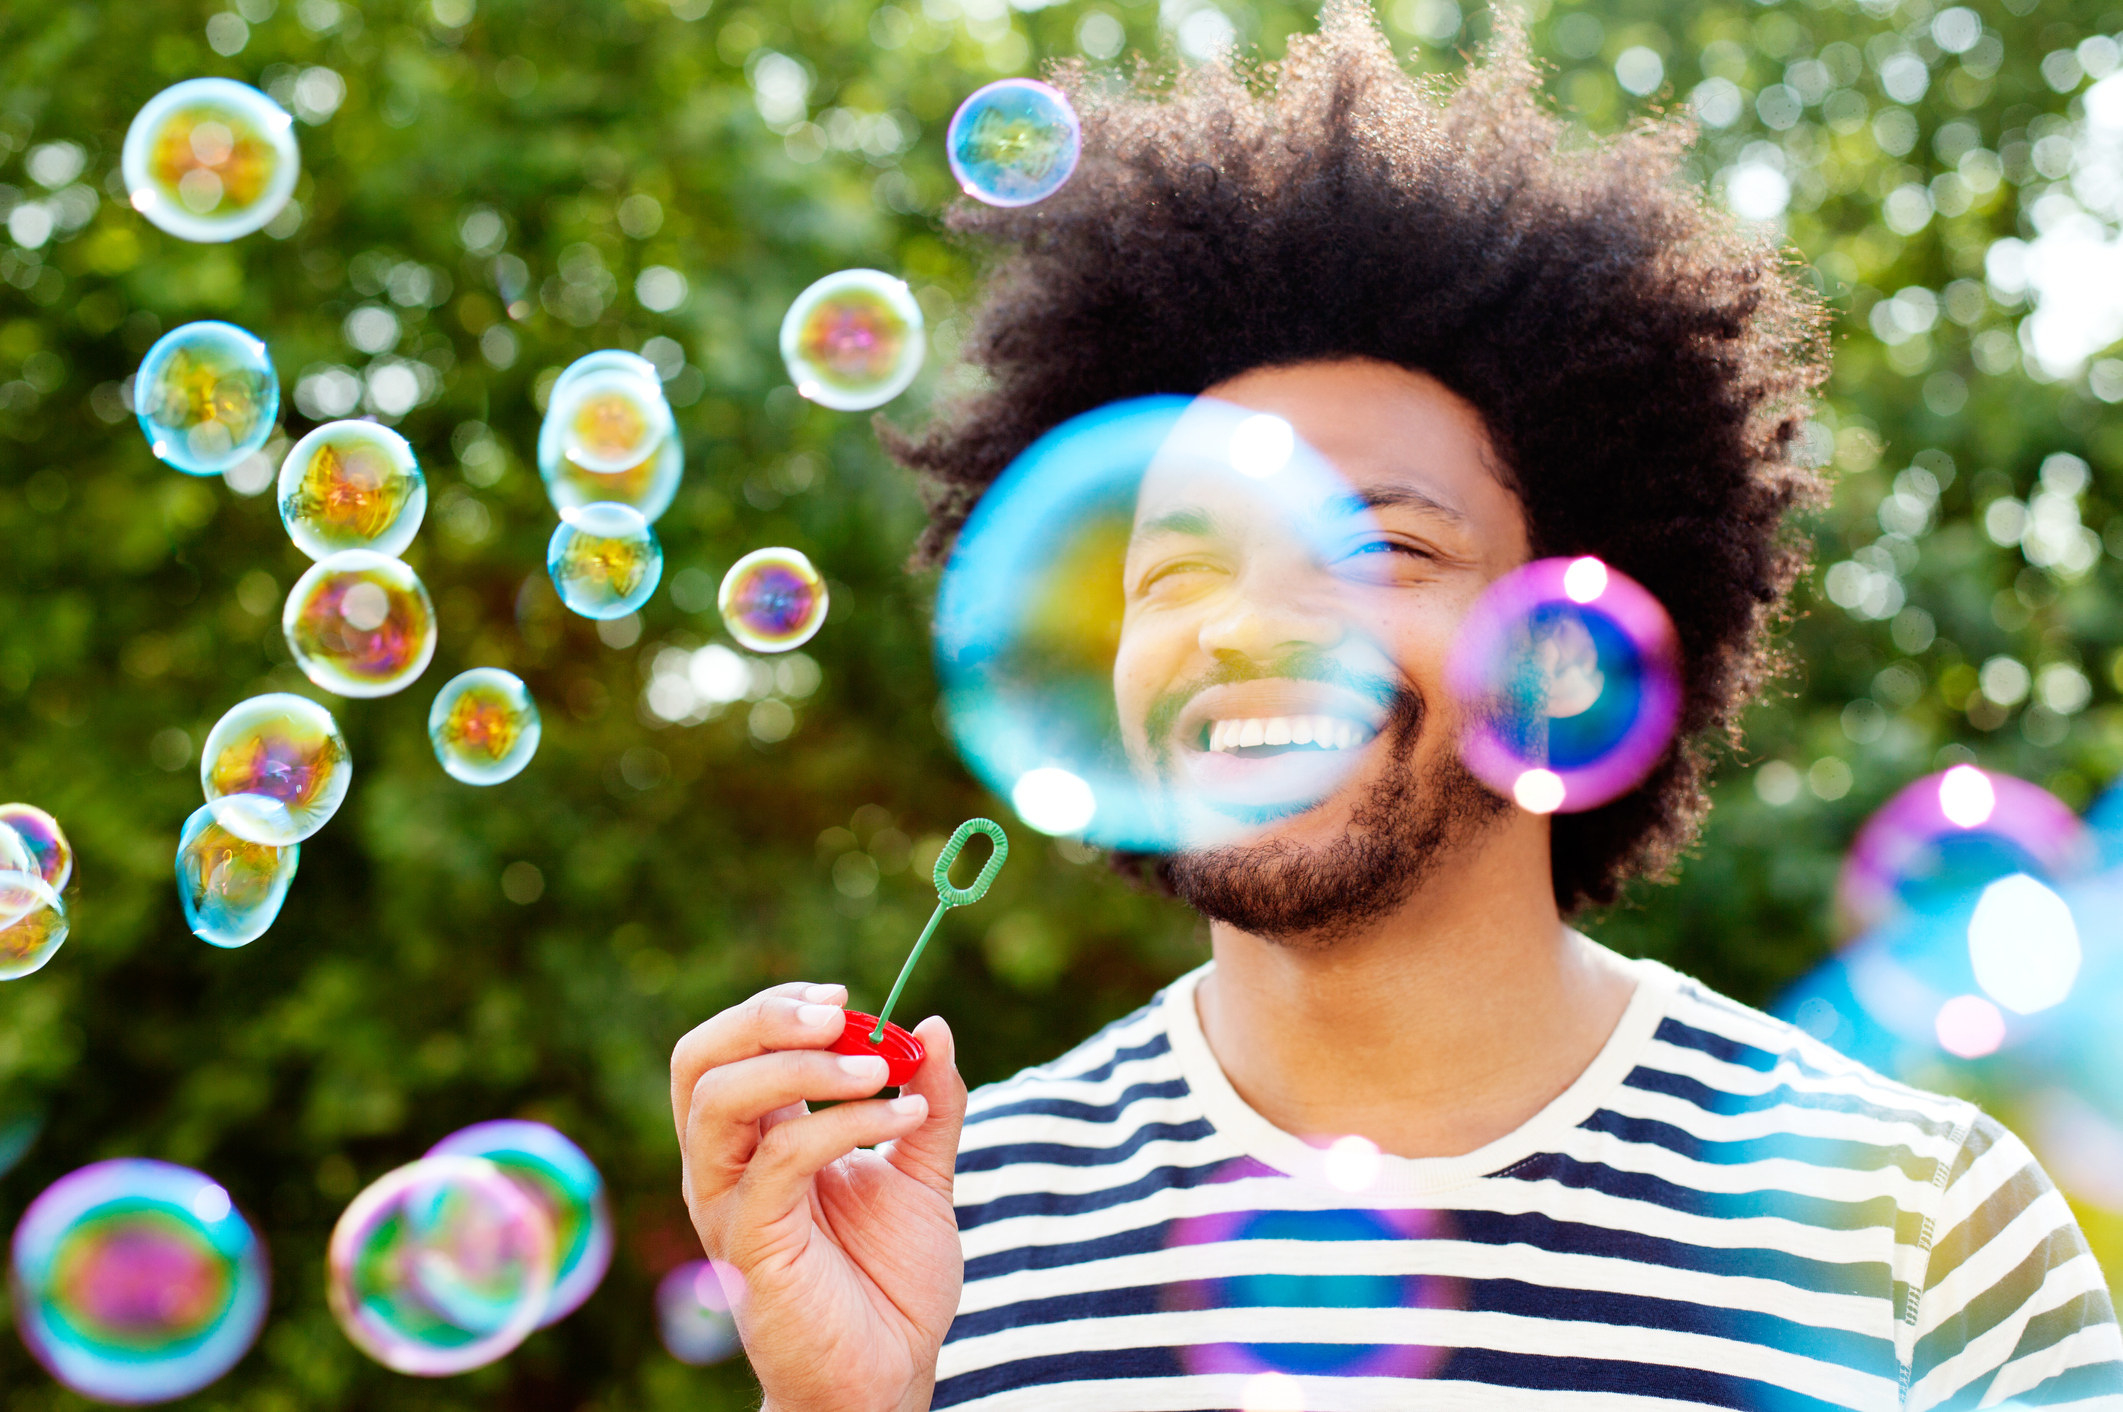 A man smiles as he is surrounded by bubbles